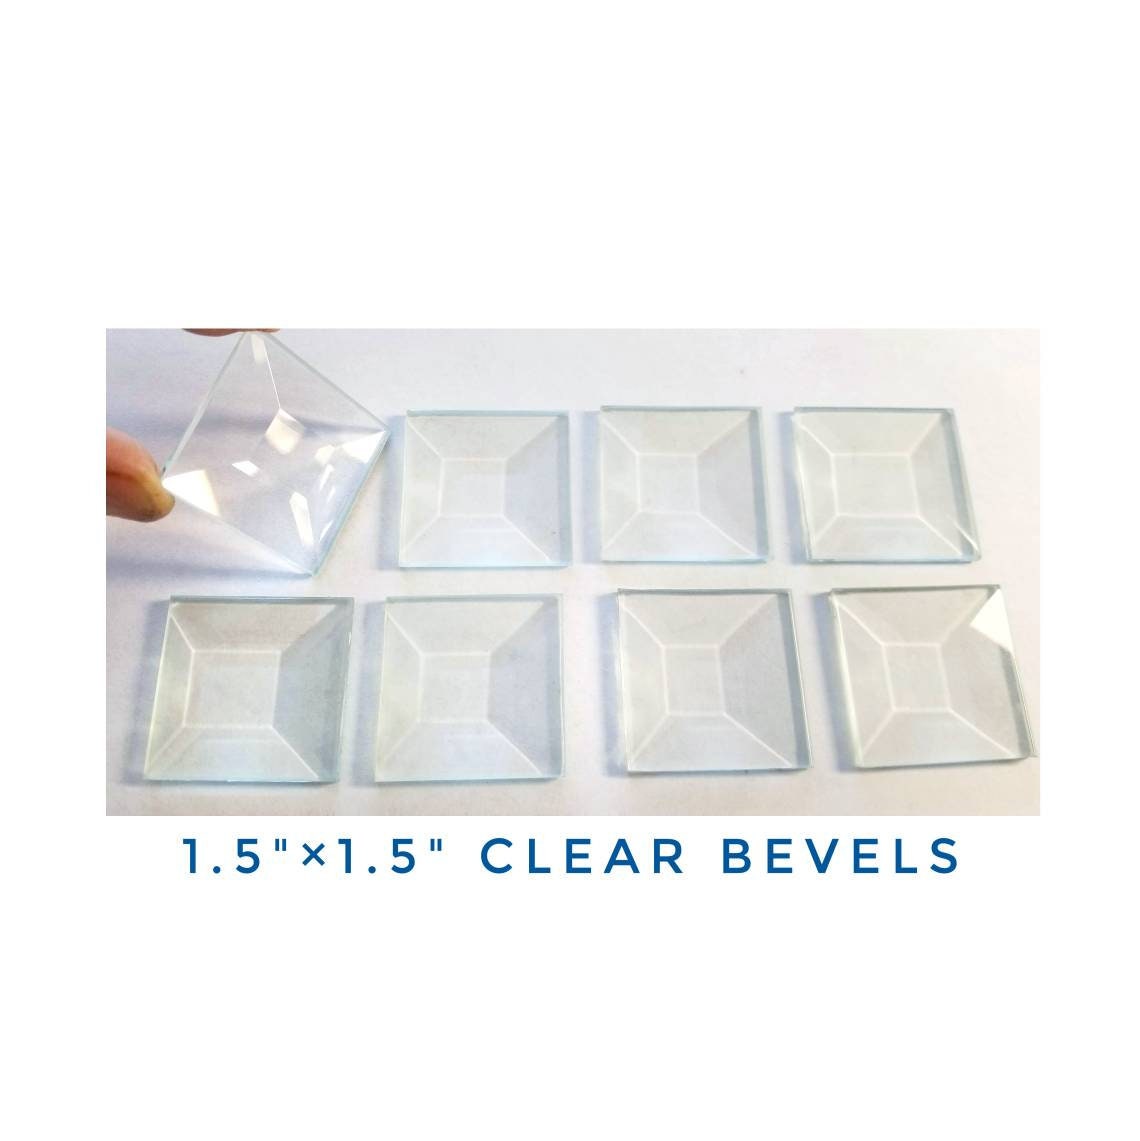 Clear Beveled Glass for Stained Glass. Set of 8. Create Windows, Boxes or Terrariums. Easy craft projects, photo charm jewelry. 1.5" Square.